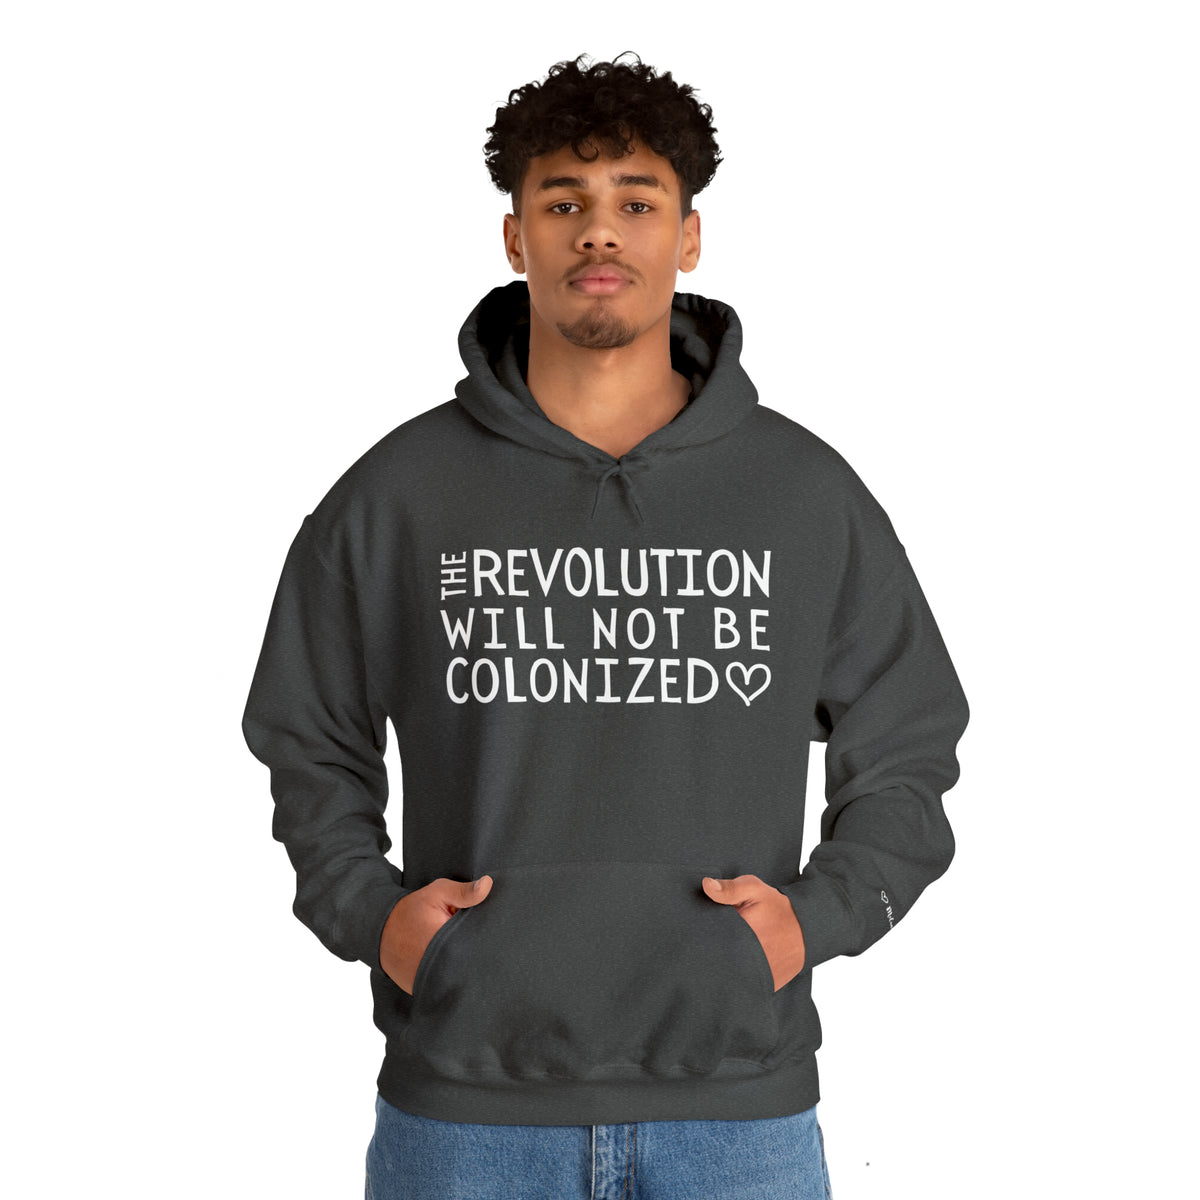 The Revolution Will Not Be Colonized - Unisex Hooded Sweatshirt